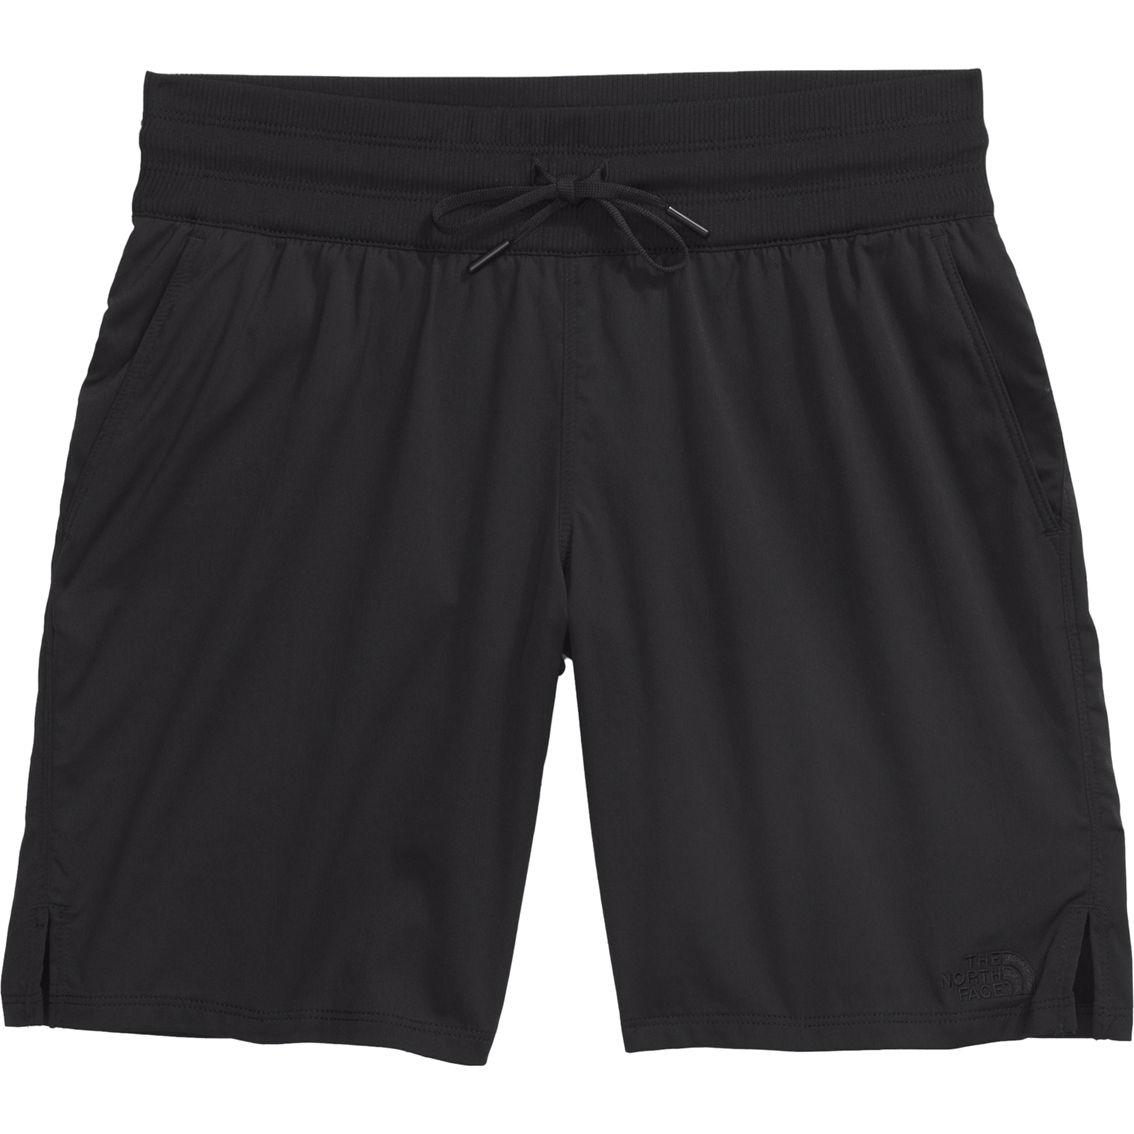 The North Face Aphrodite Motion Bermuda Shorts - Image 5 of 5